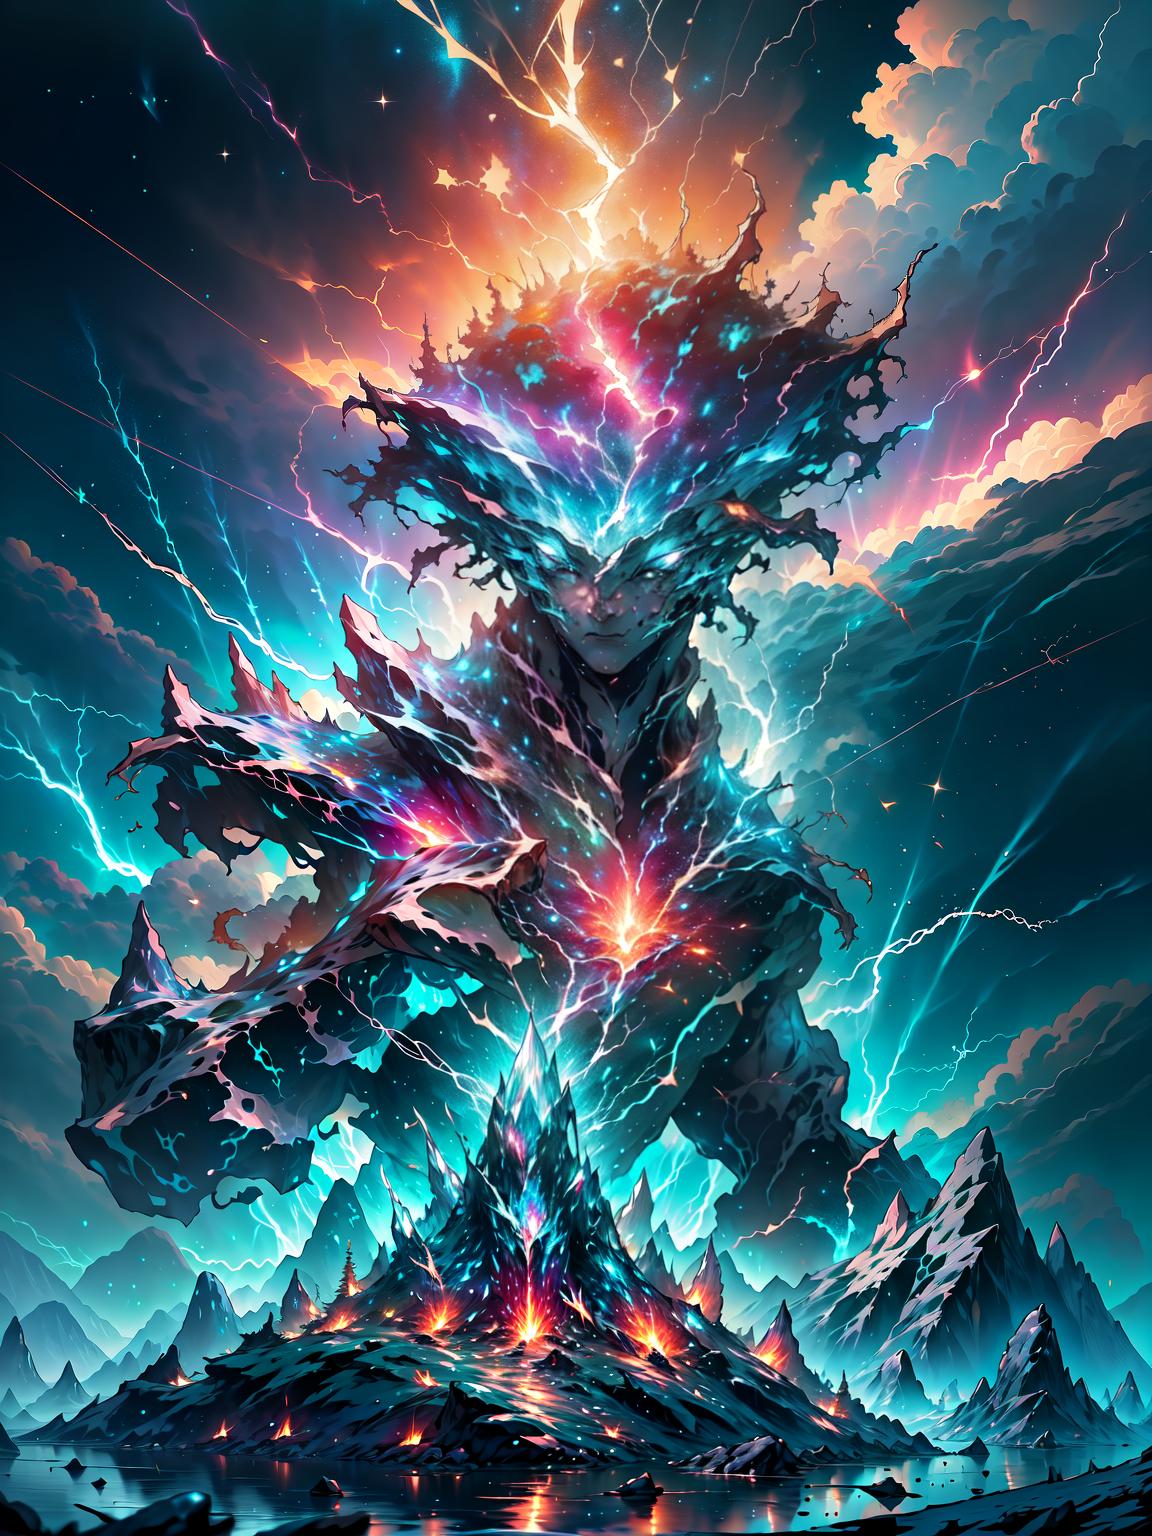  master piece, best quality, ultra detailed, highres, 4k.8k, Golem, Harnessing the lightning energy, Majestic, BREAK Mystical and powerful creation, Mountain peak, Crackling lightning bolts, ancient runes, BREAK Electrifying and awe inspiring, Glowing aura, dynamic lightning effects, crystallineAI,fantasy00d